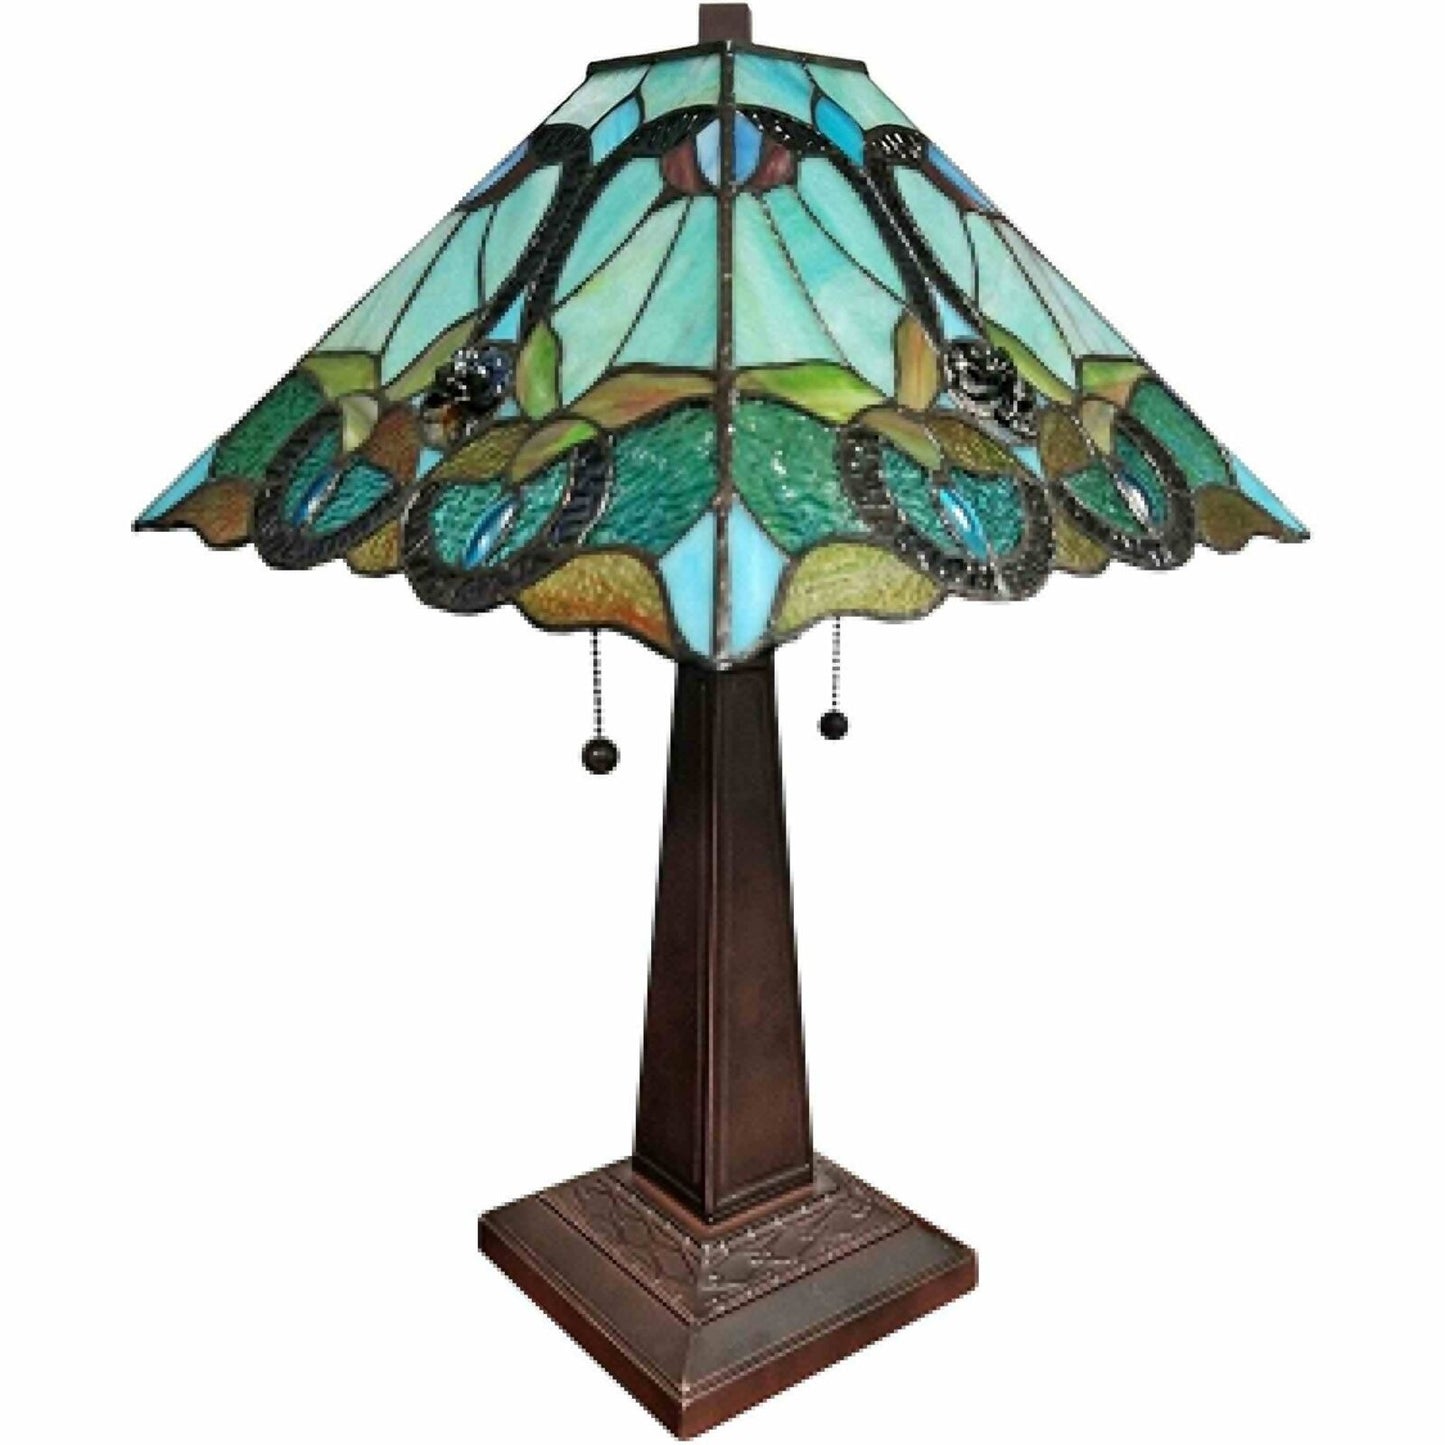 Tiffany Style Stained Glass Mission Sky Blue Table Lamp Desk Nightstand 20in